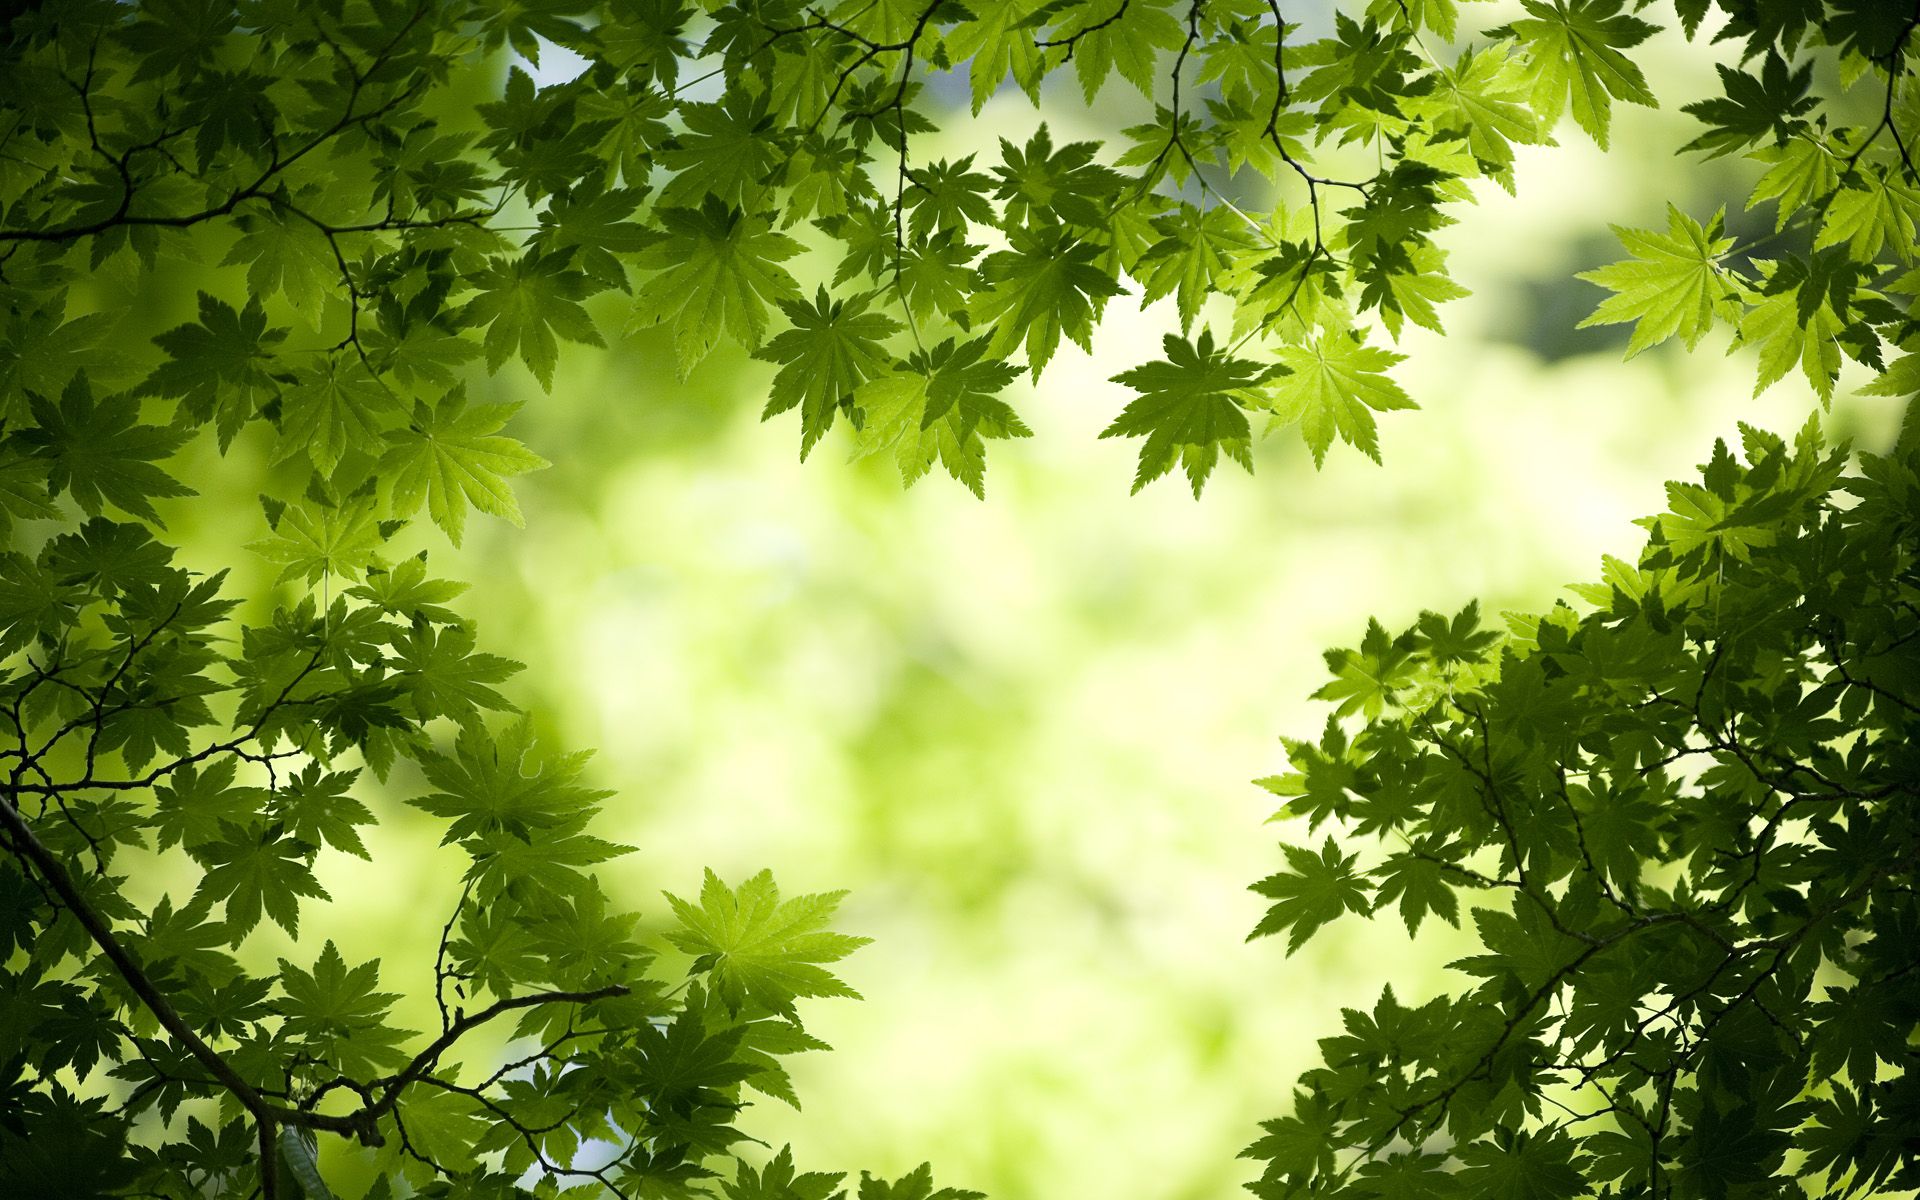 Green Maple Leaves Wallpapers | HD Wallpapers